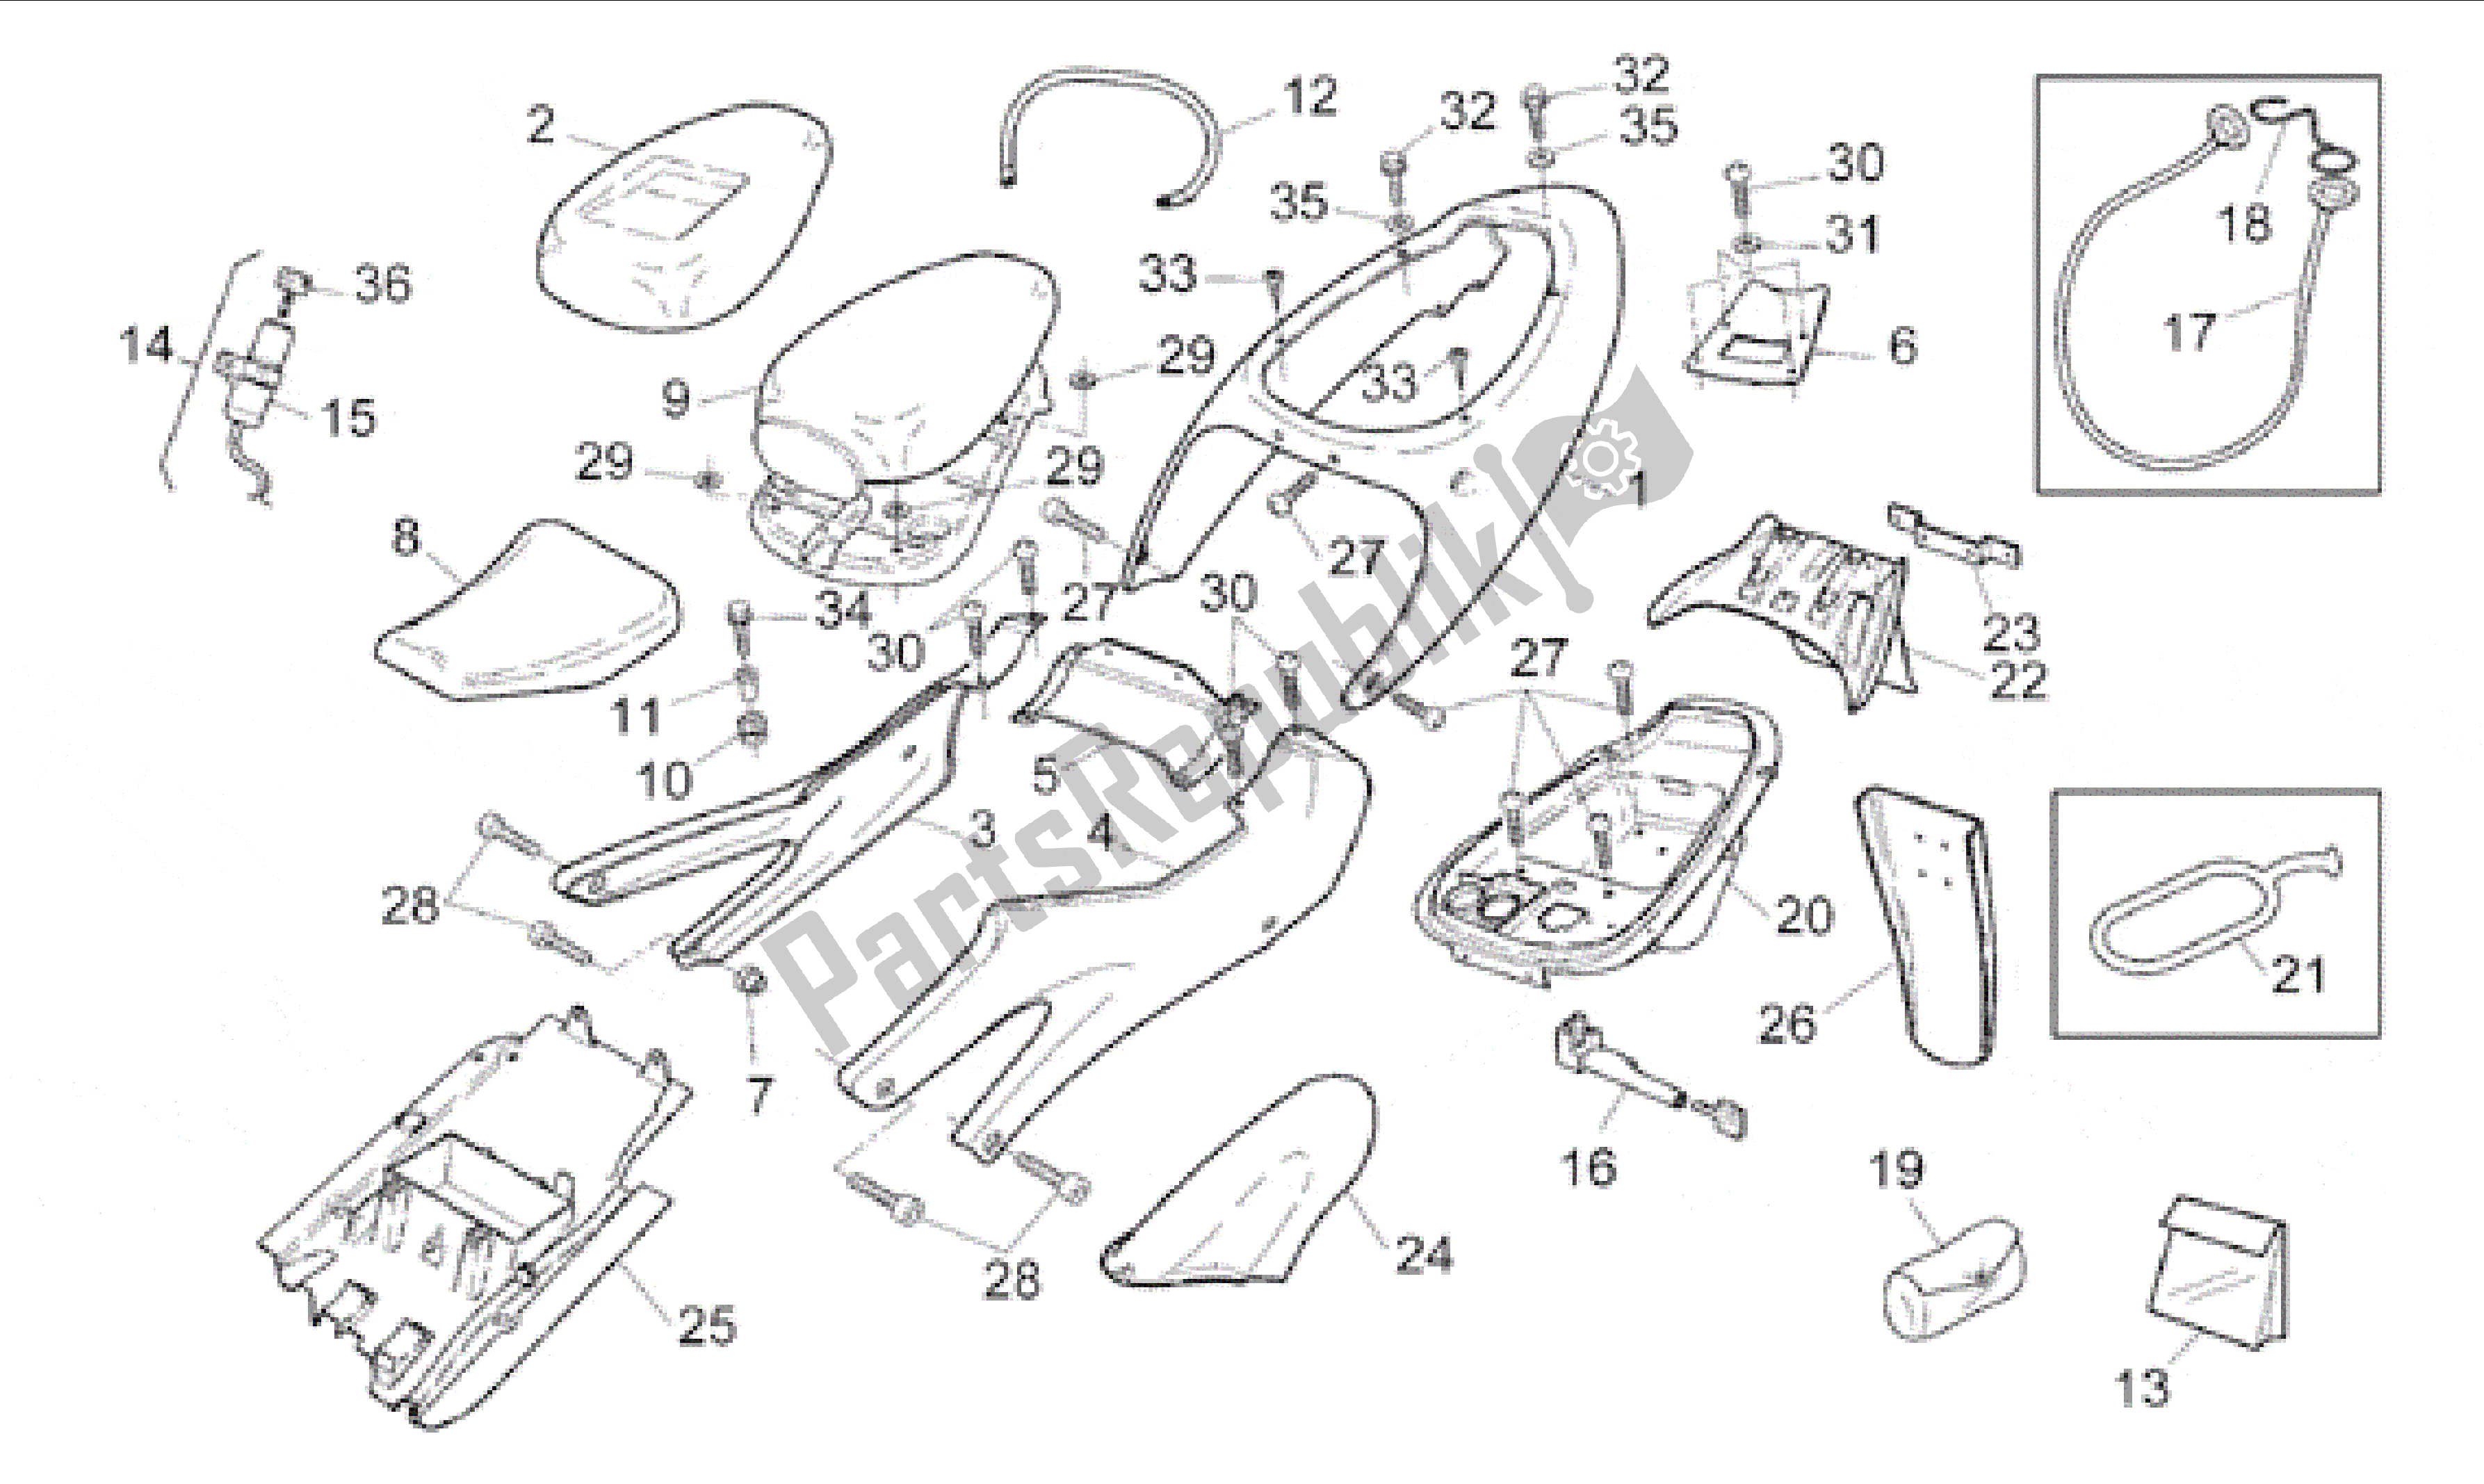 All parts for the Rear Body of the Aprilia RS 250 1995 - 1997